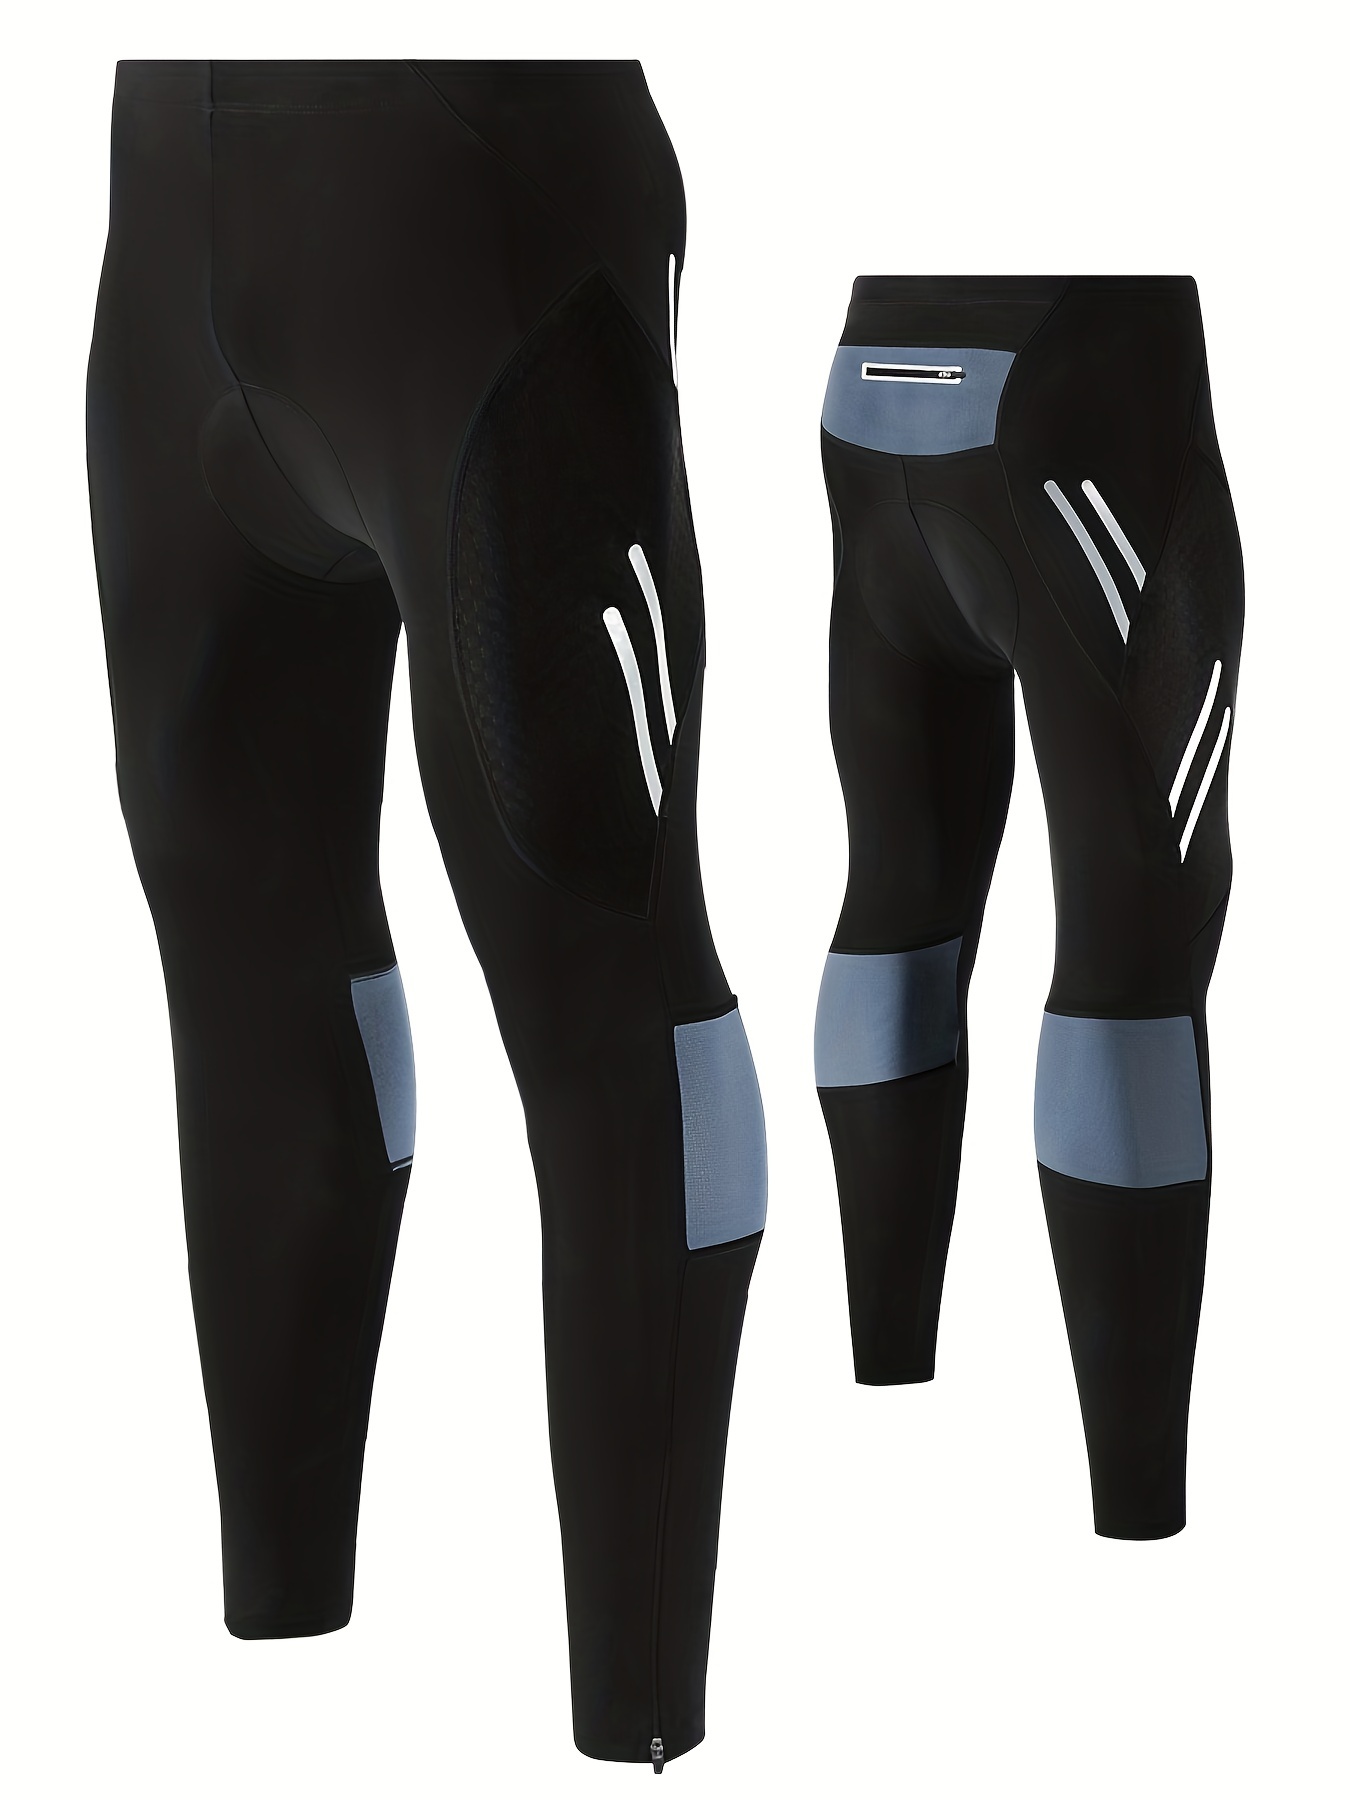 Reflective Men's Cycling Leggings - Quick Dry Stretch Trousers for  Comfortable Riding